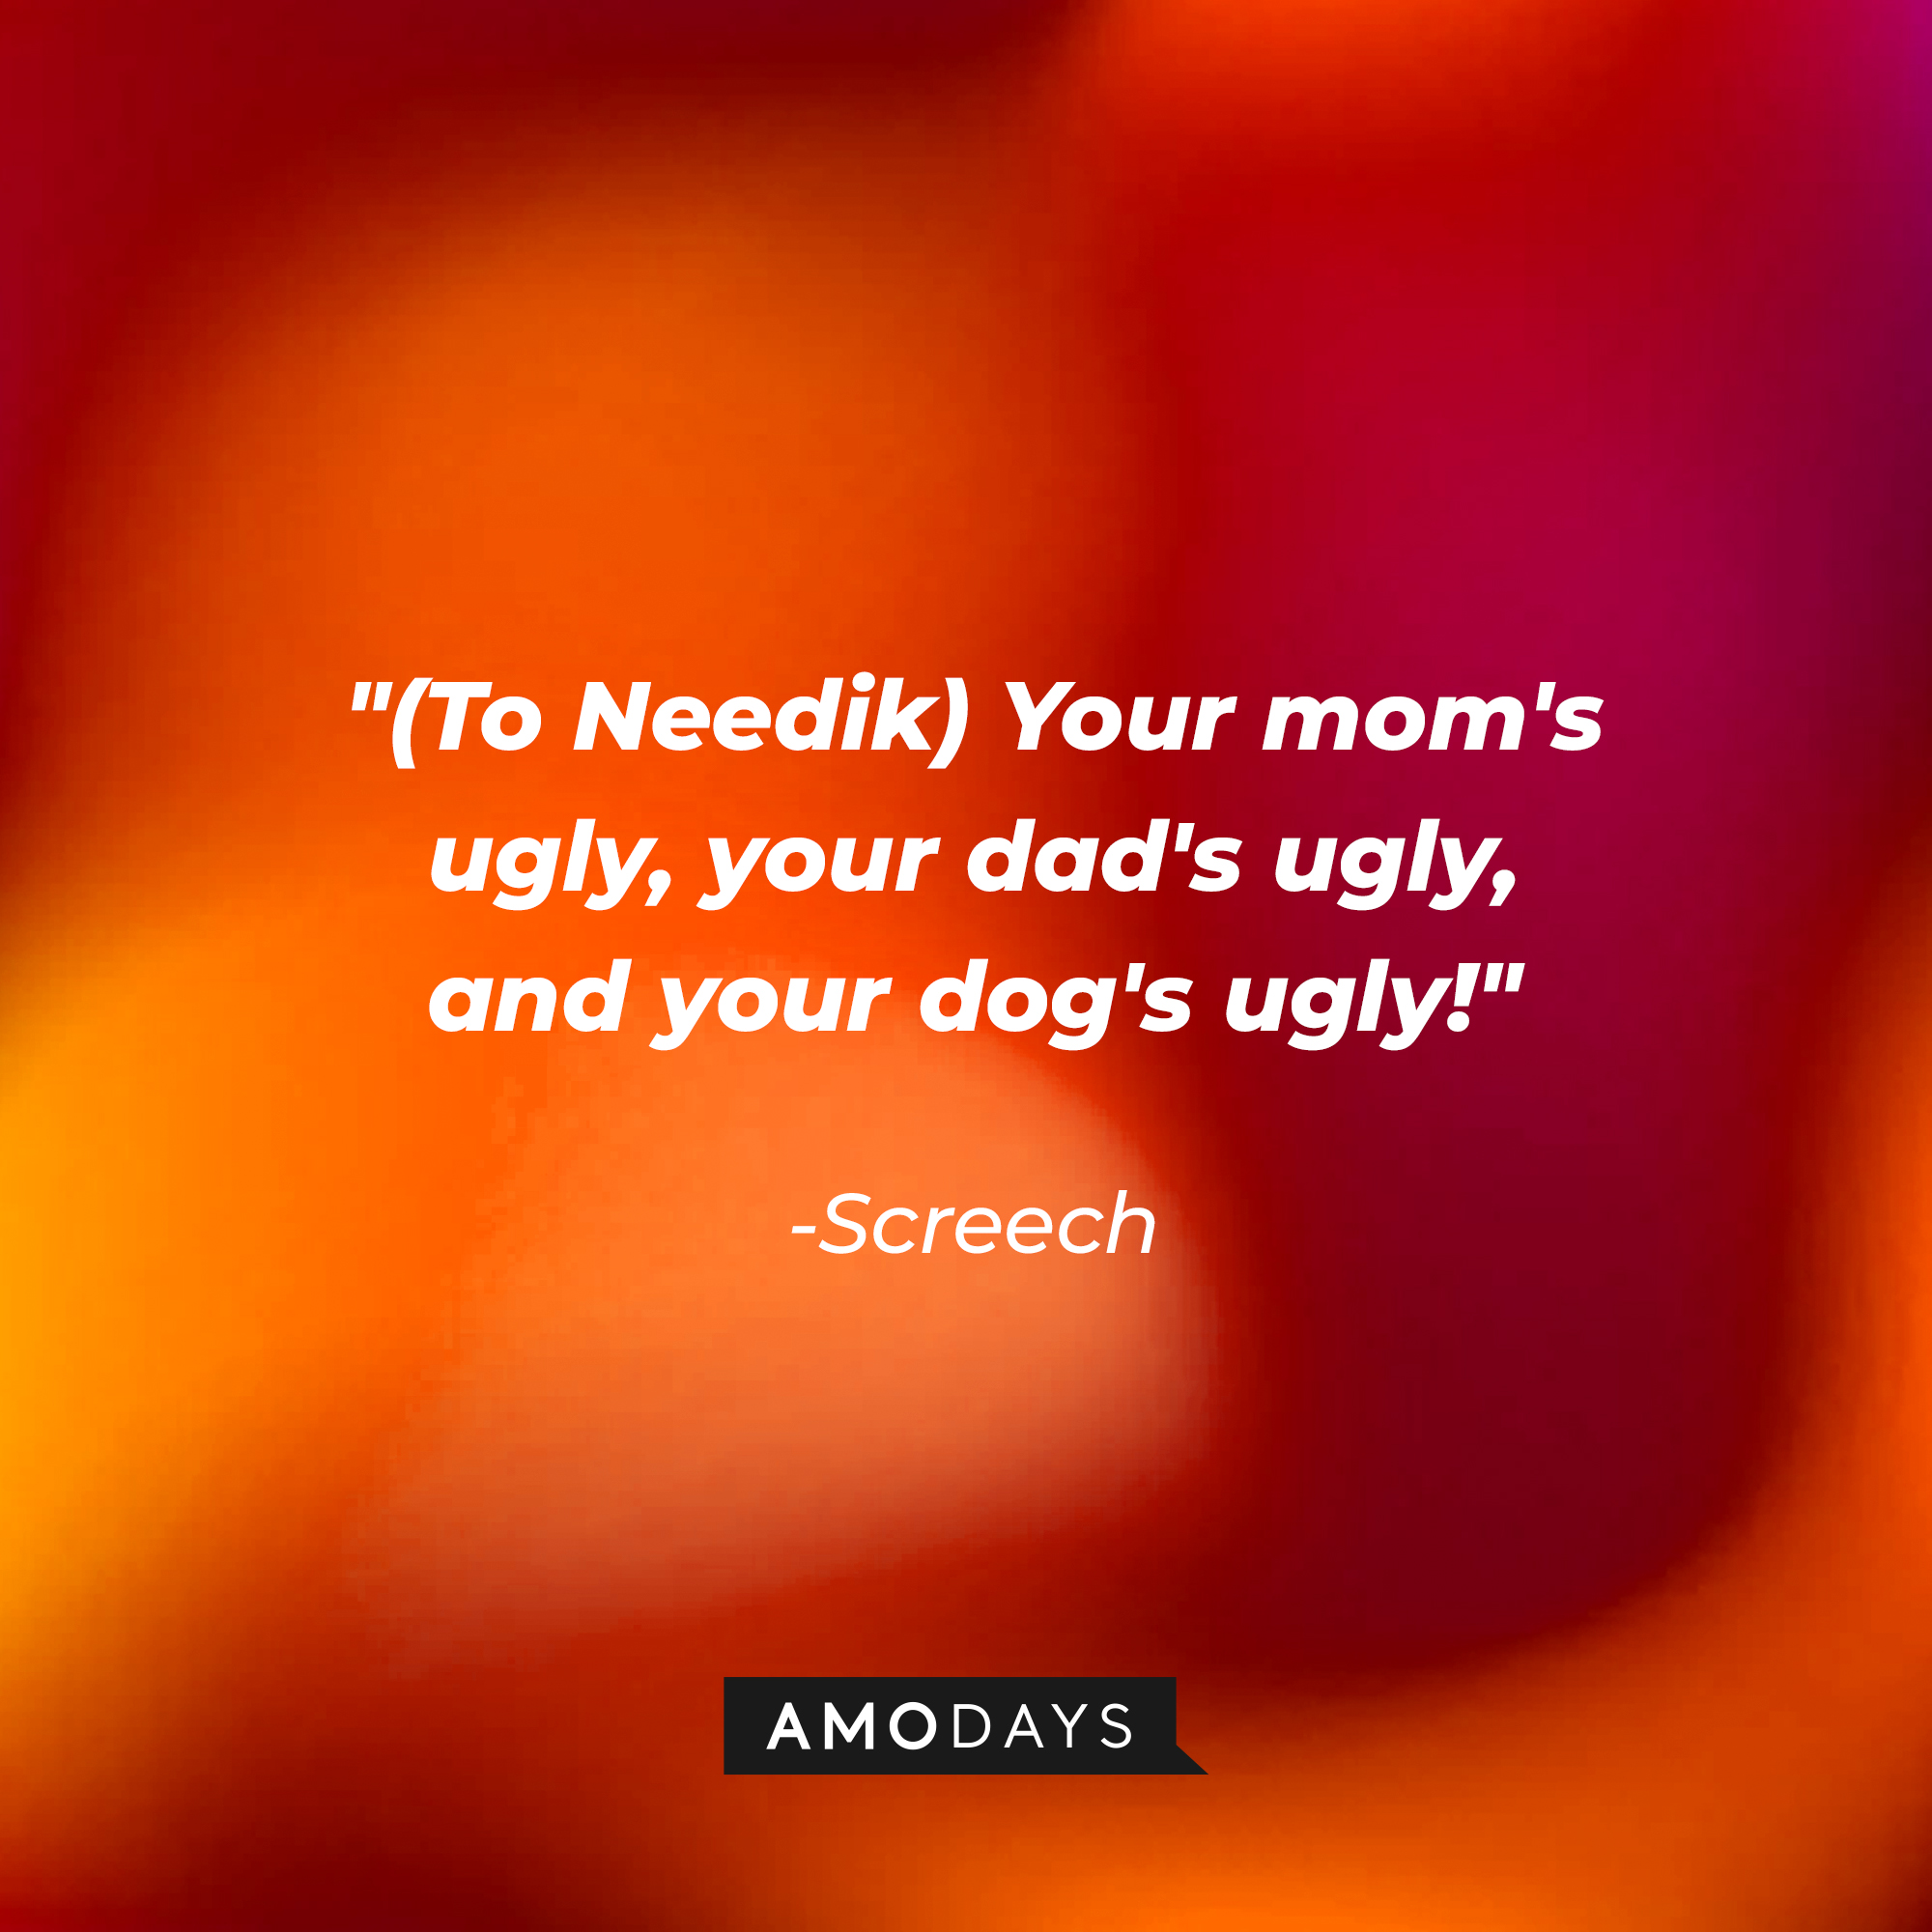 Screech with his quote, "(To Needik) Your mom's ugly, your dad's ugly, and your dog's ugly!" | Source: youtube.com/SavedbytheBell